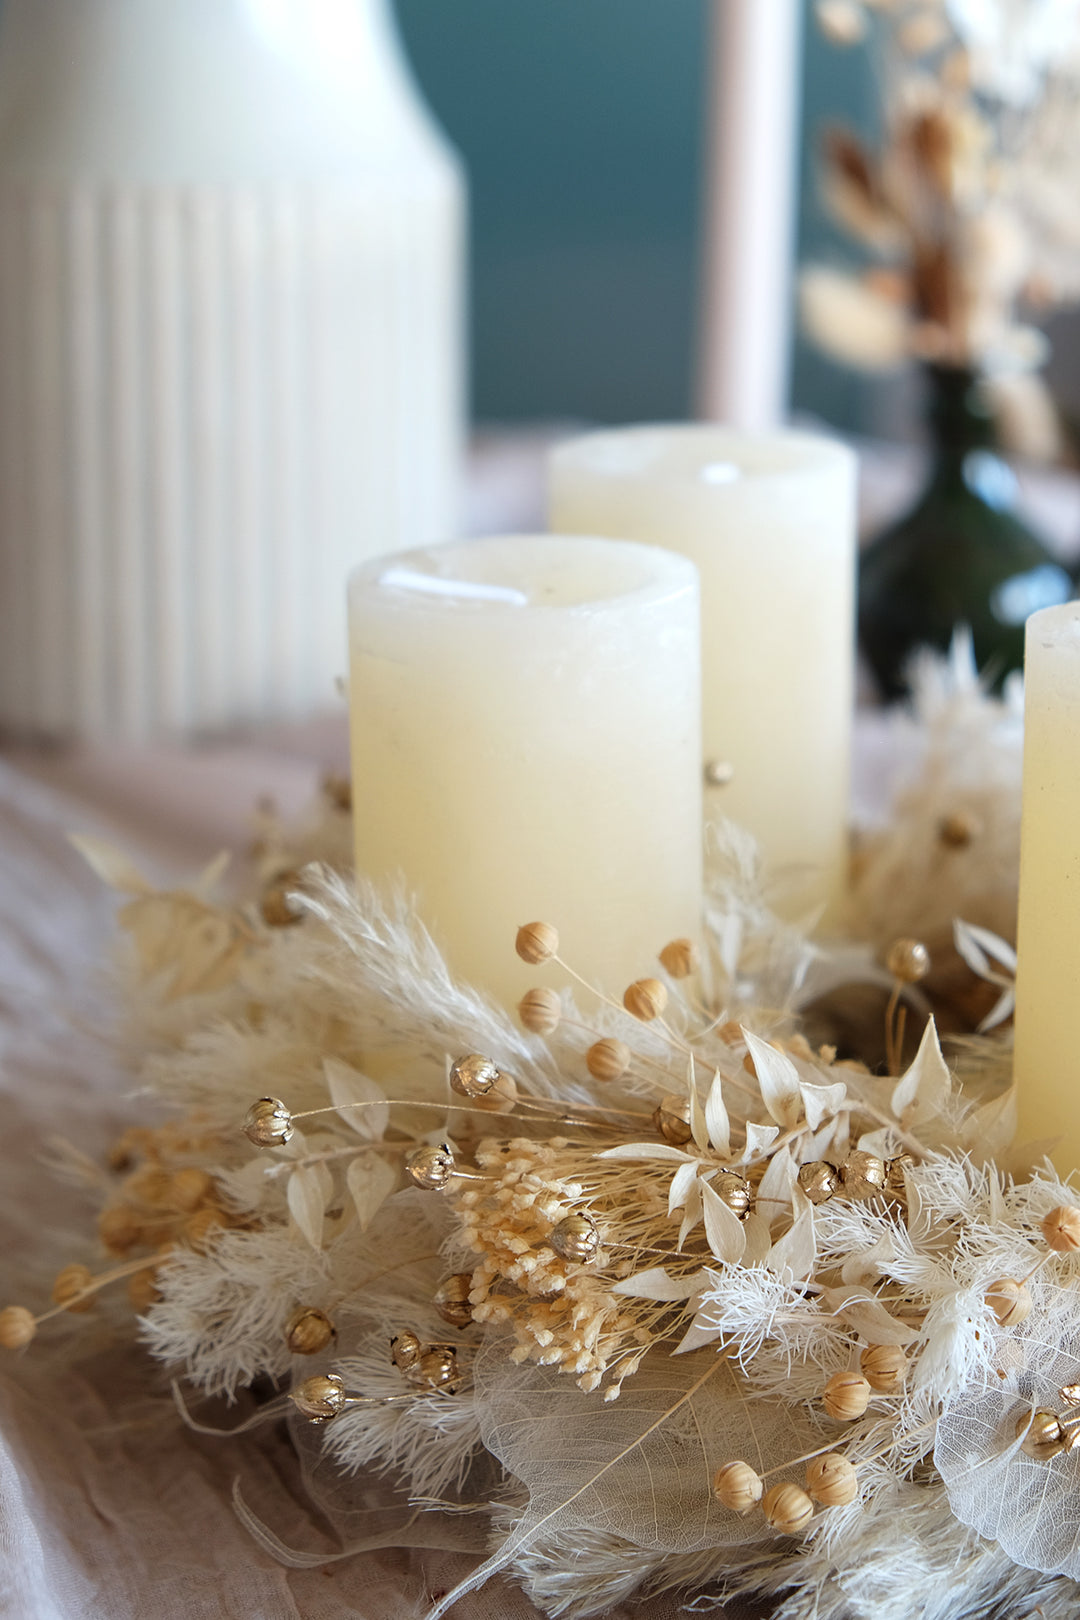 Advent & Christmas Wreath | Natural White, Ivory & Beige